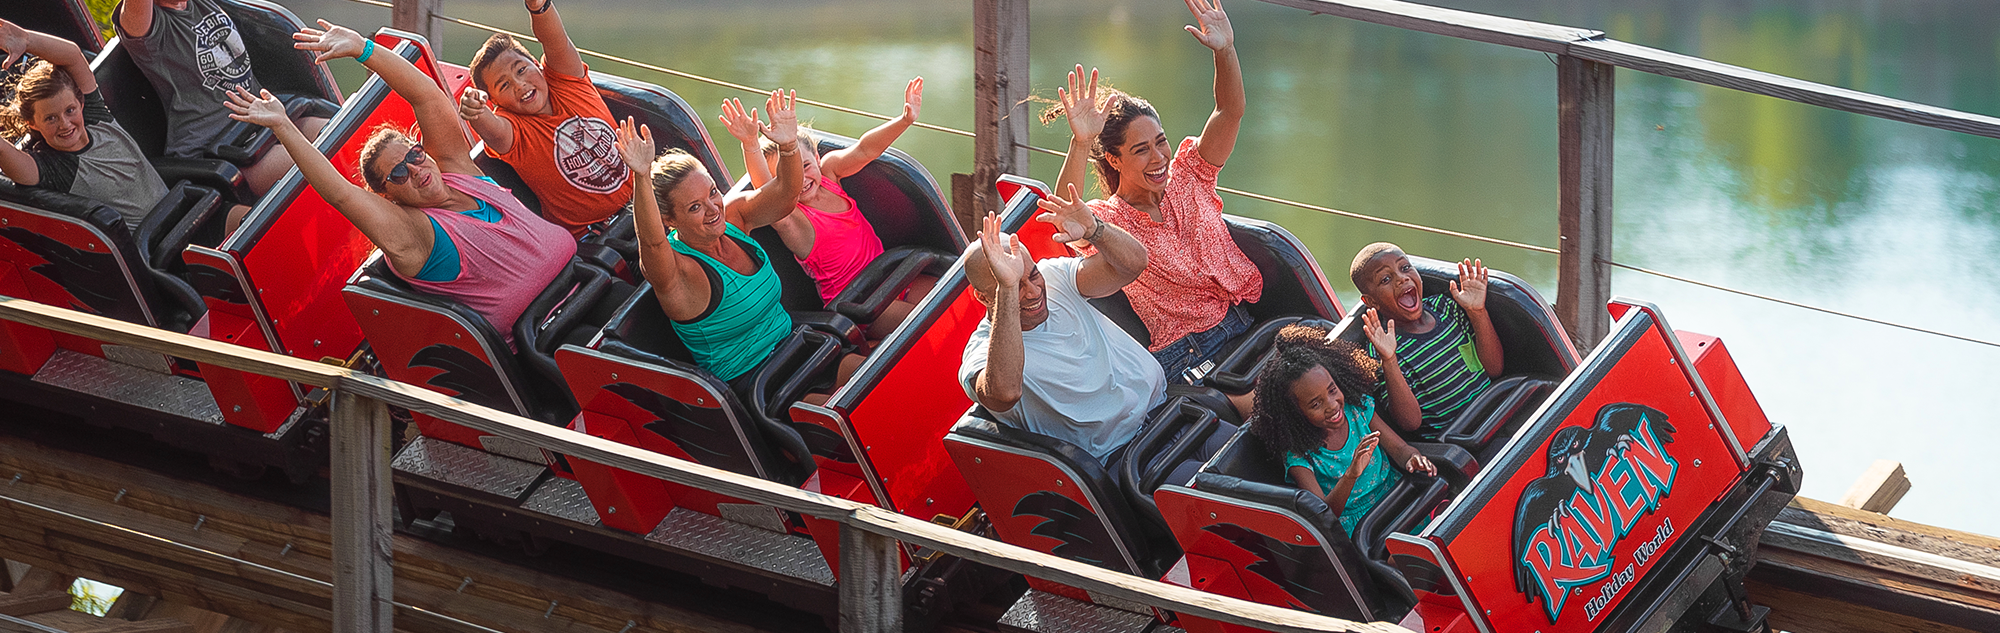 A family rides the Raven roller coaster as it makes a sweeping turn over Lake Rudolph.